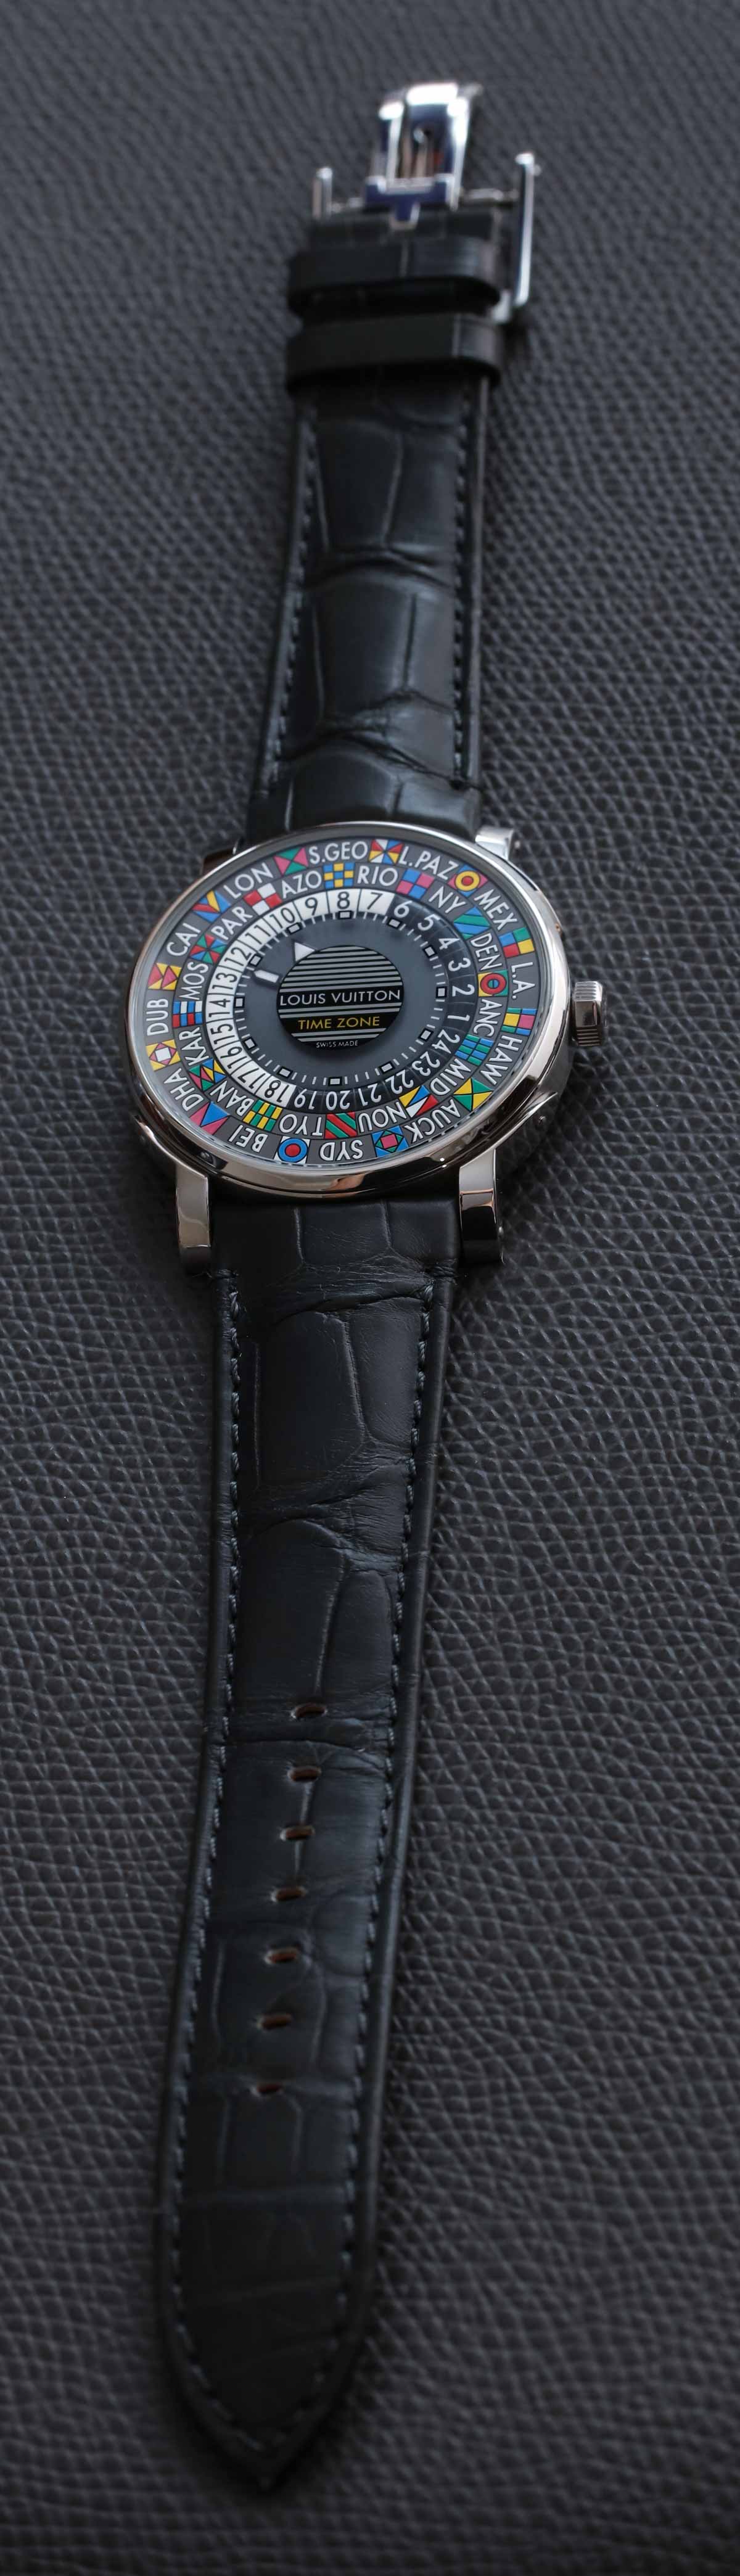 Introducing The Louis Vuitton Escale Worldtime, A Hand-Painted Travel Watch  - Hodinkee